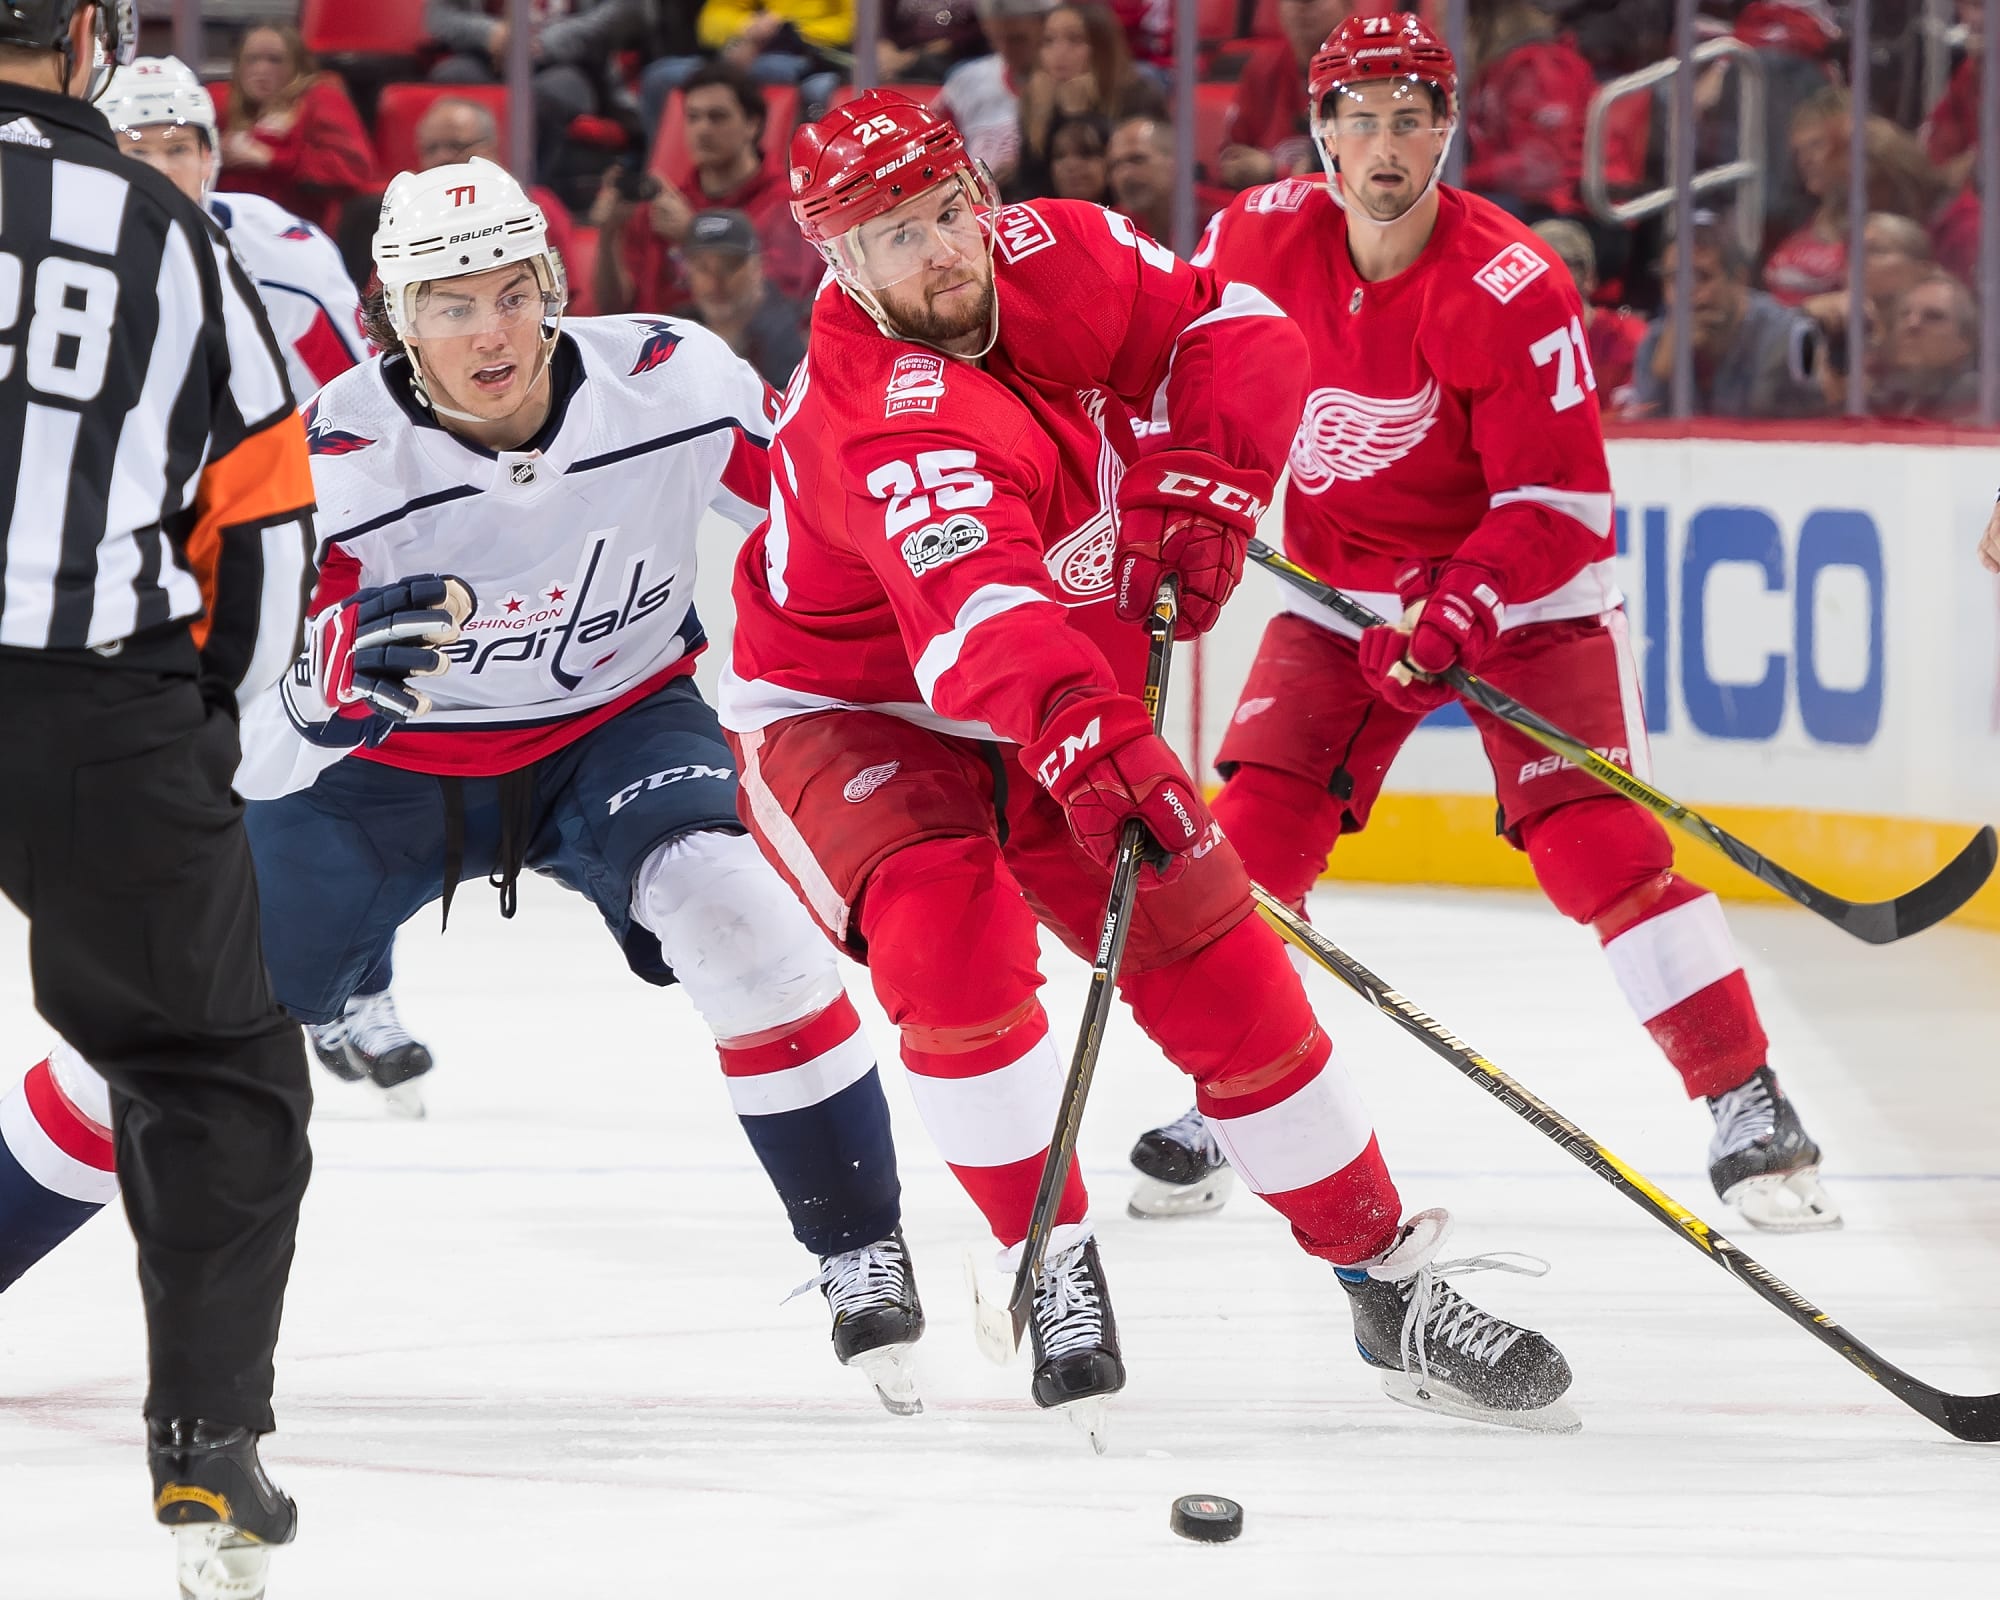 How to watch Detroit Red Wings vs. Capitals on TV, Livestream